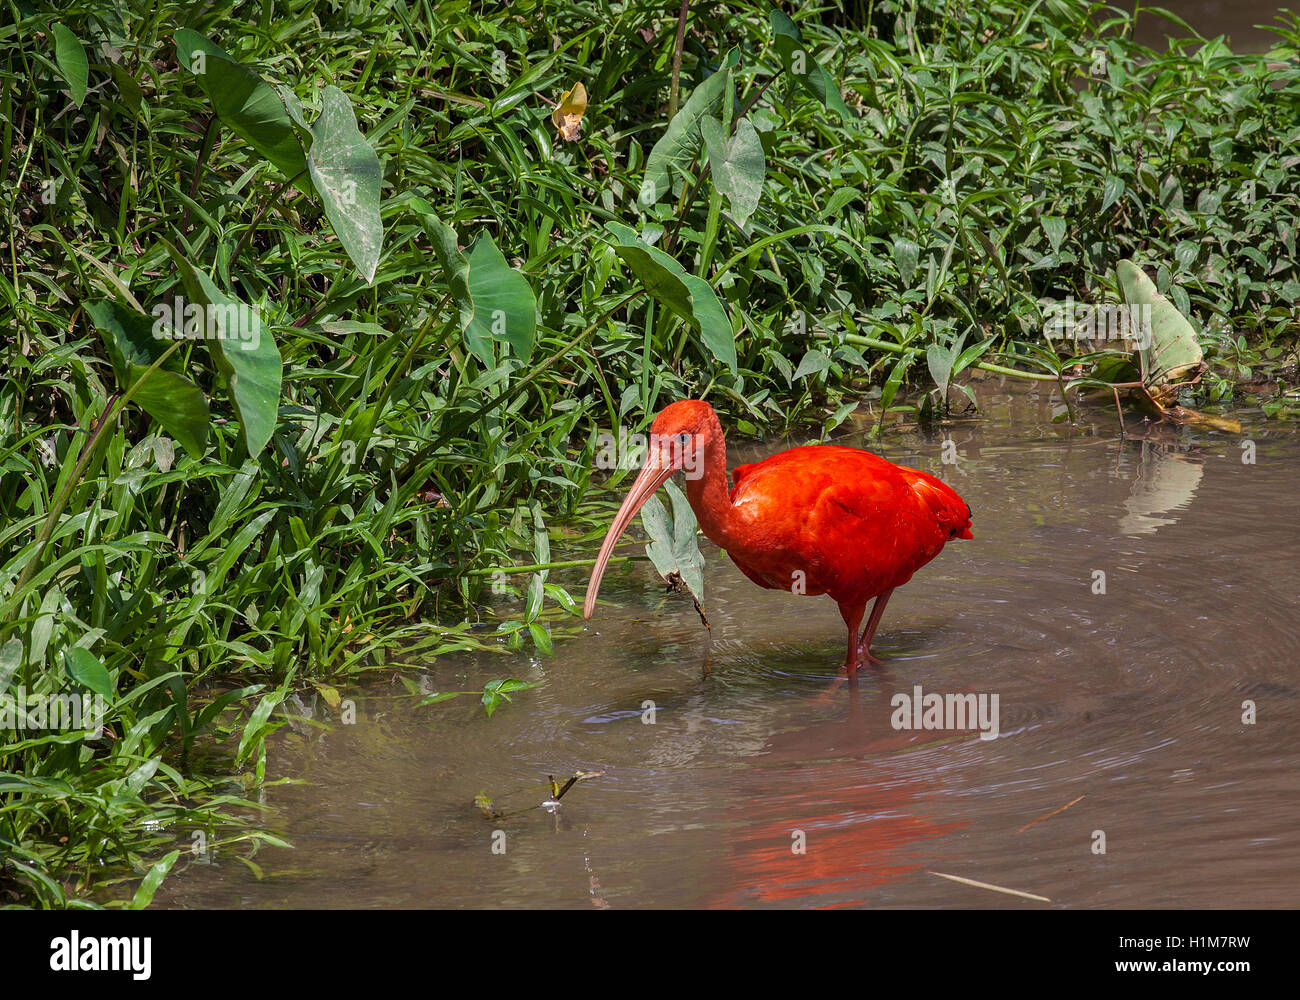 Scarlet Ibis, Eudocimus ruber, searches for food along a foliage covered shoreline. Stock Photo